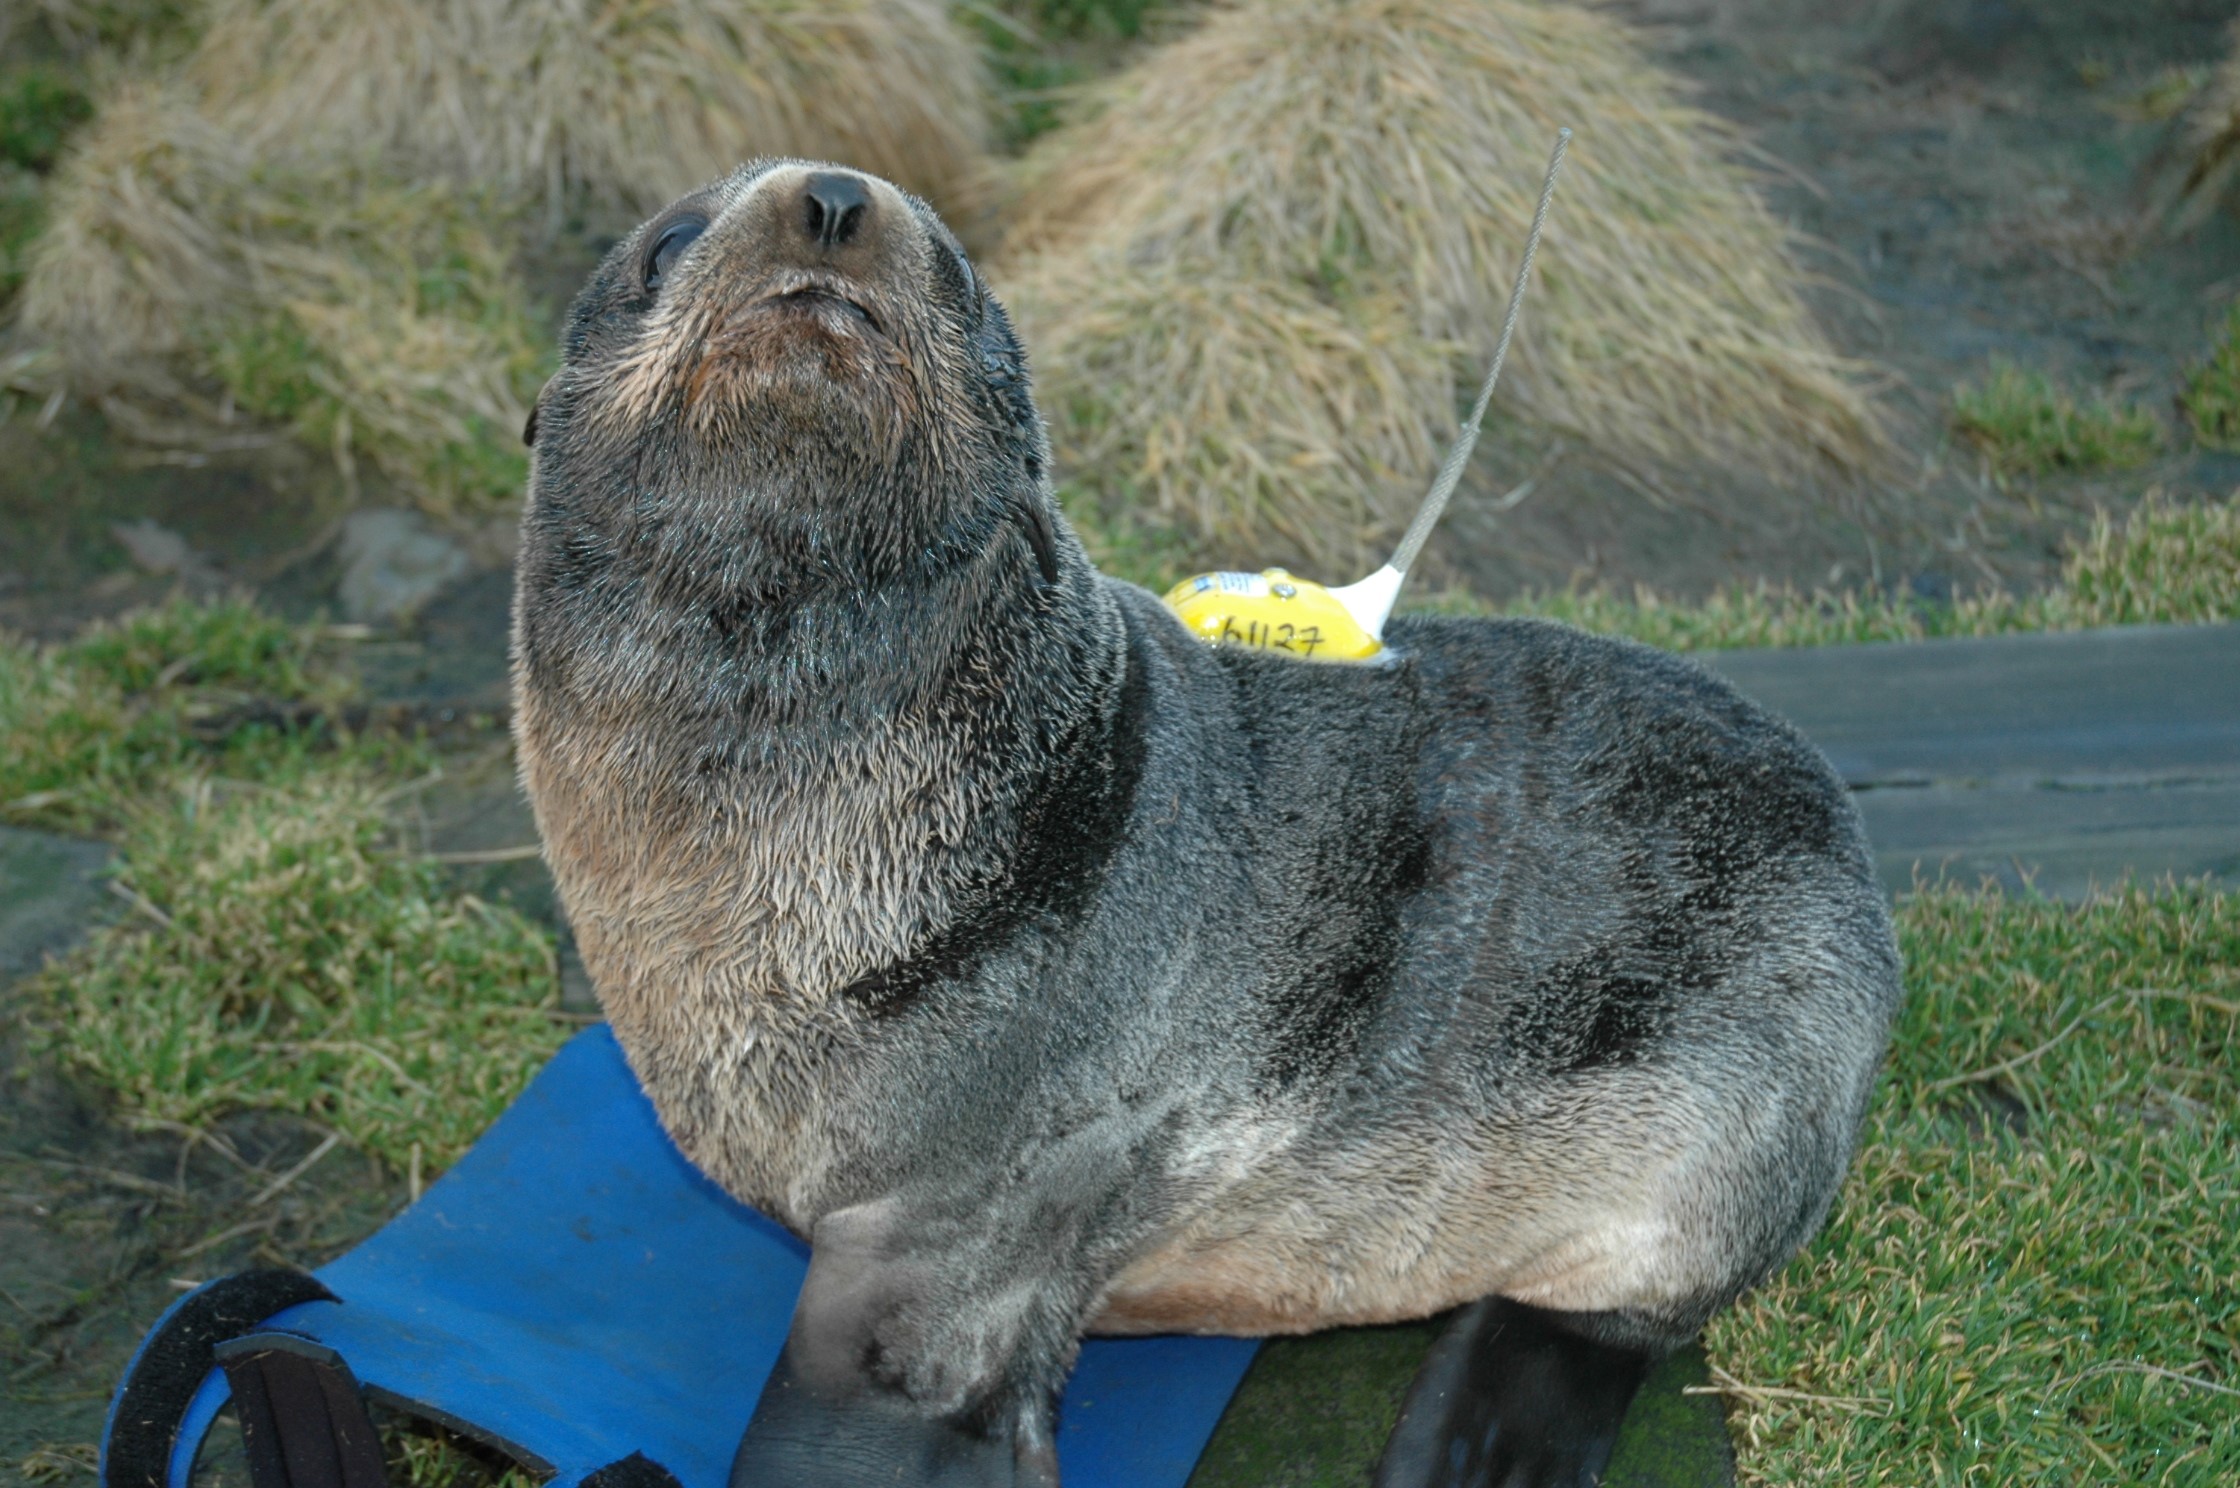 A northern fur seal pup equipped with a satellite tag to track its location. Credit: Mary Anne Lea.